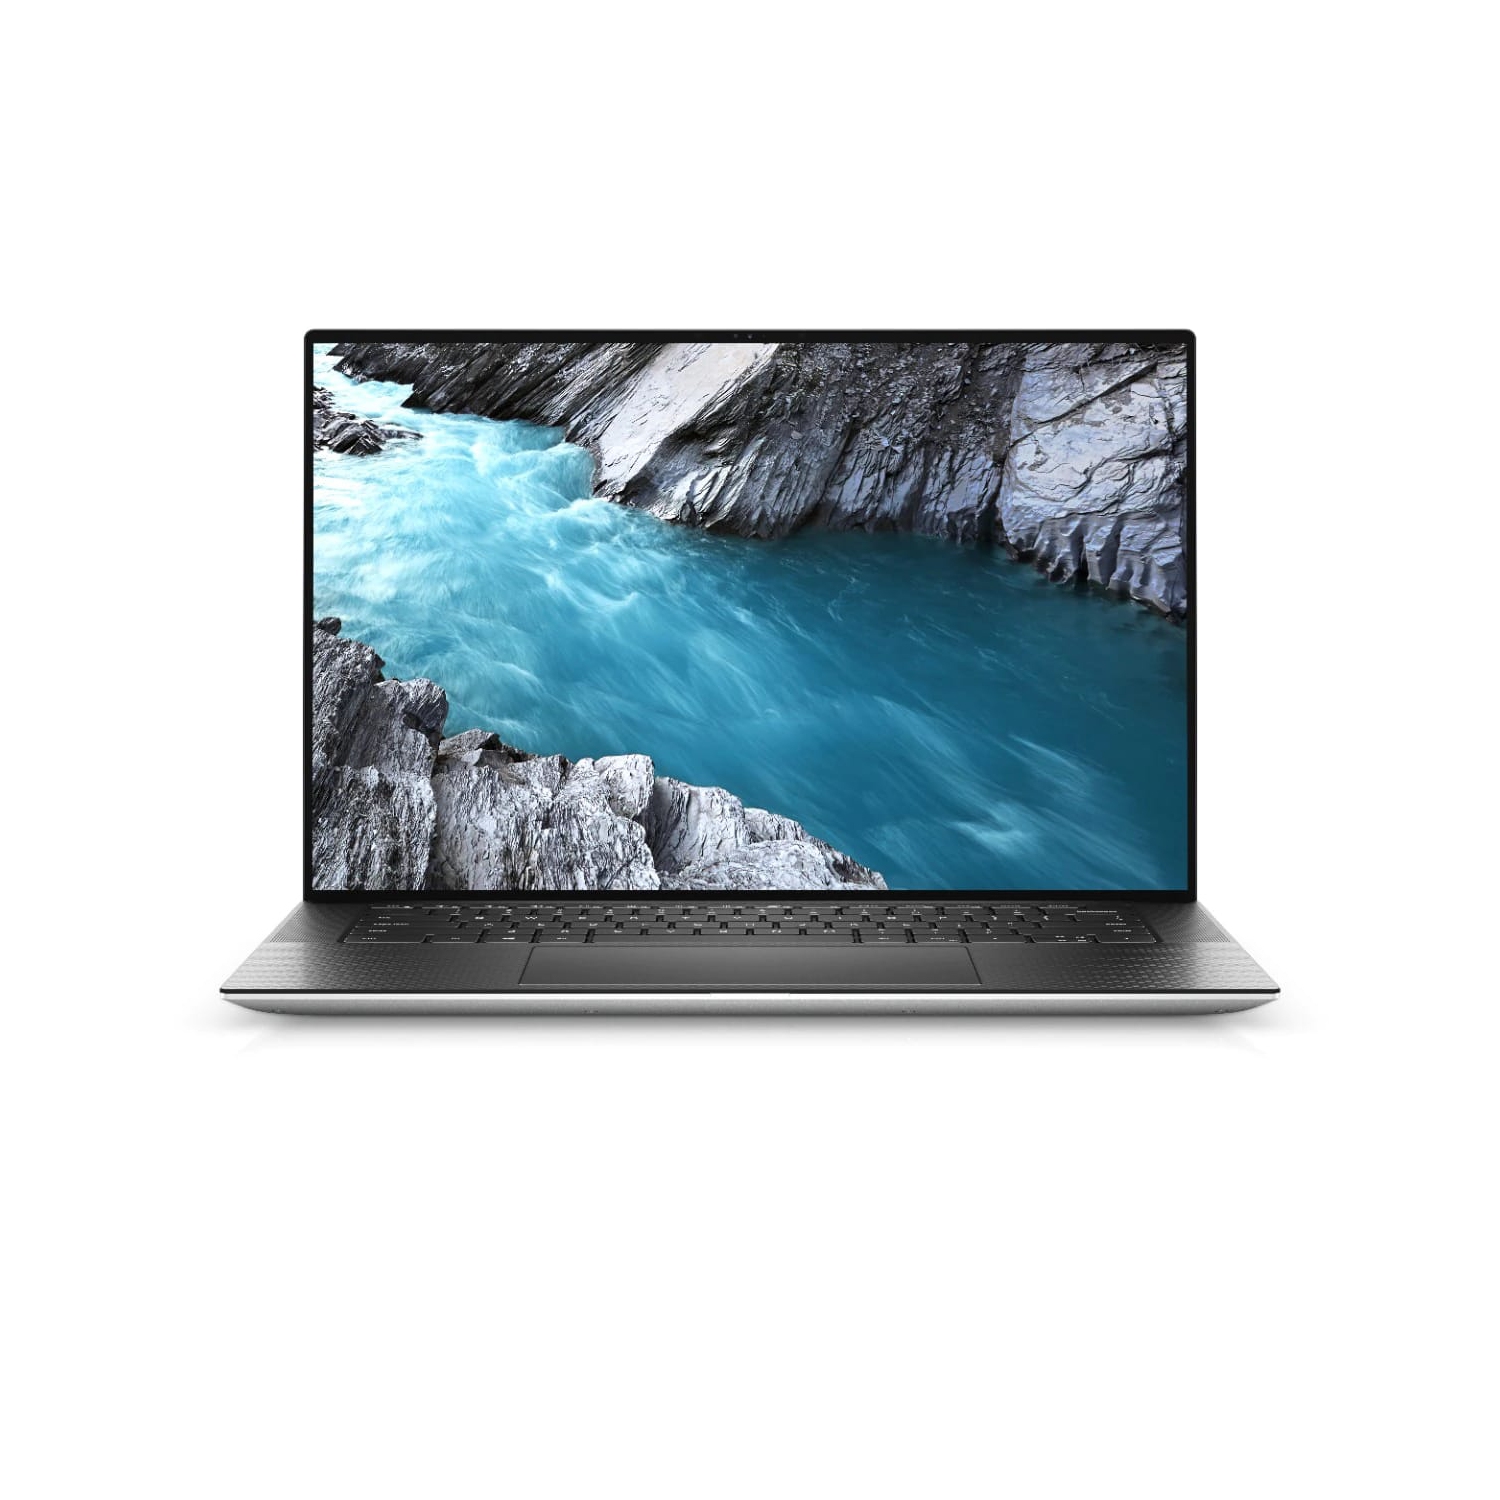 Refurbished (Excellent) - Dell XPS 15 9500 Laptop (2020) | 15" FHD+ | Core i5 - 256GB SSD - 8GB RAM | 4 Cores @ 4.5 GHz - 10th Gen CPU Certified Refurbished